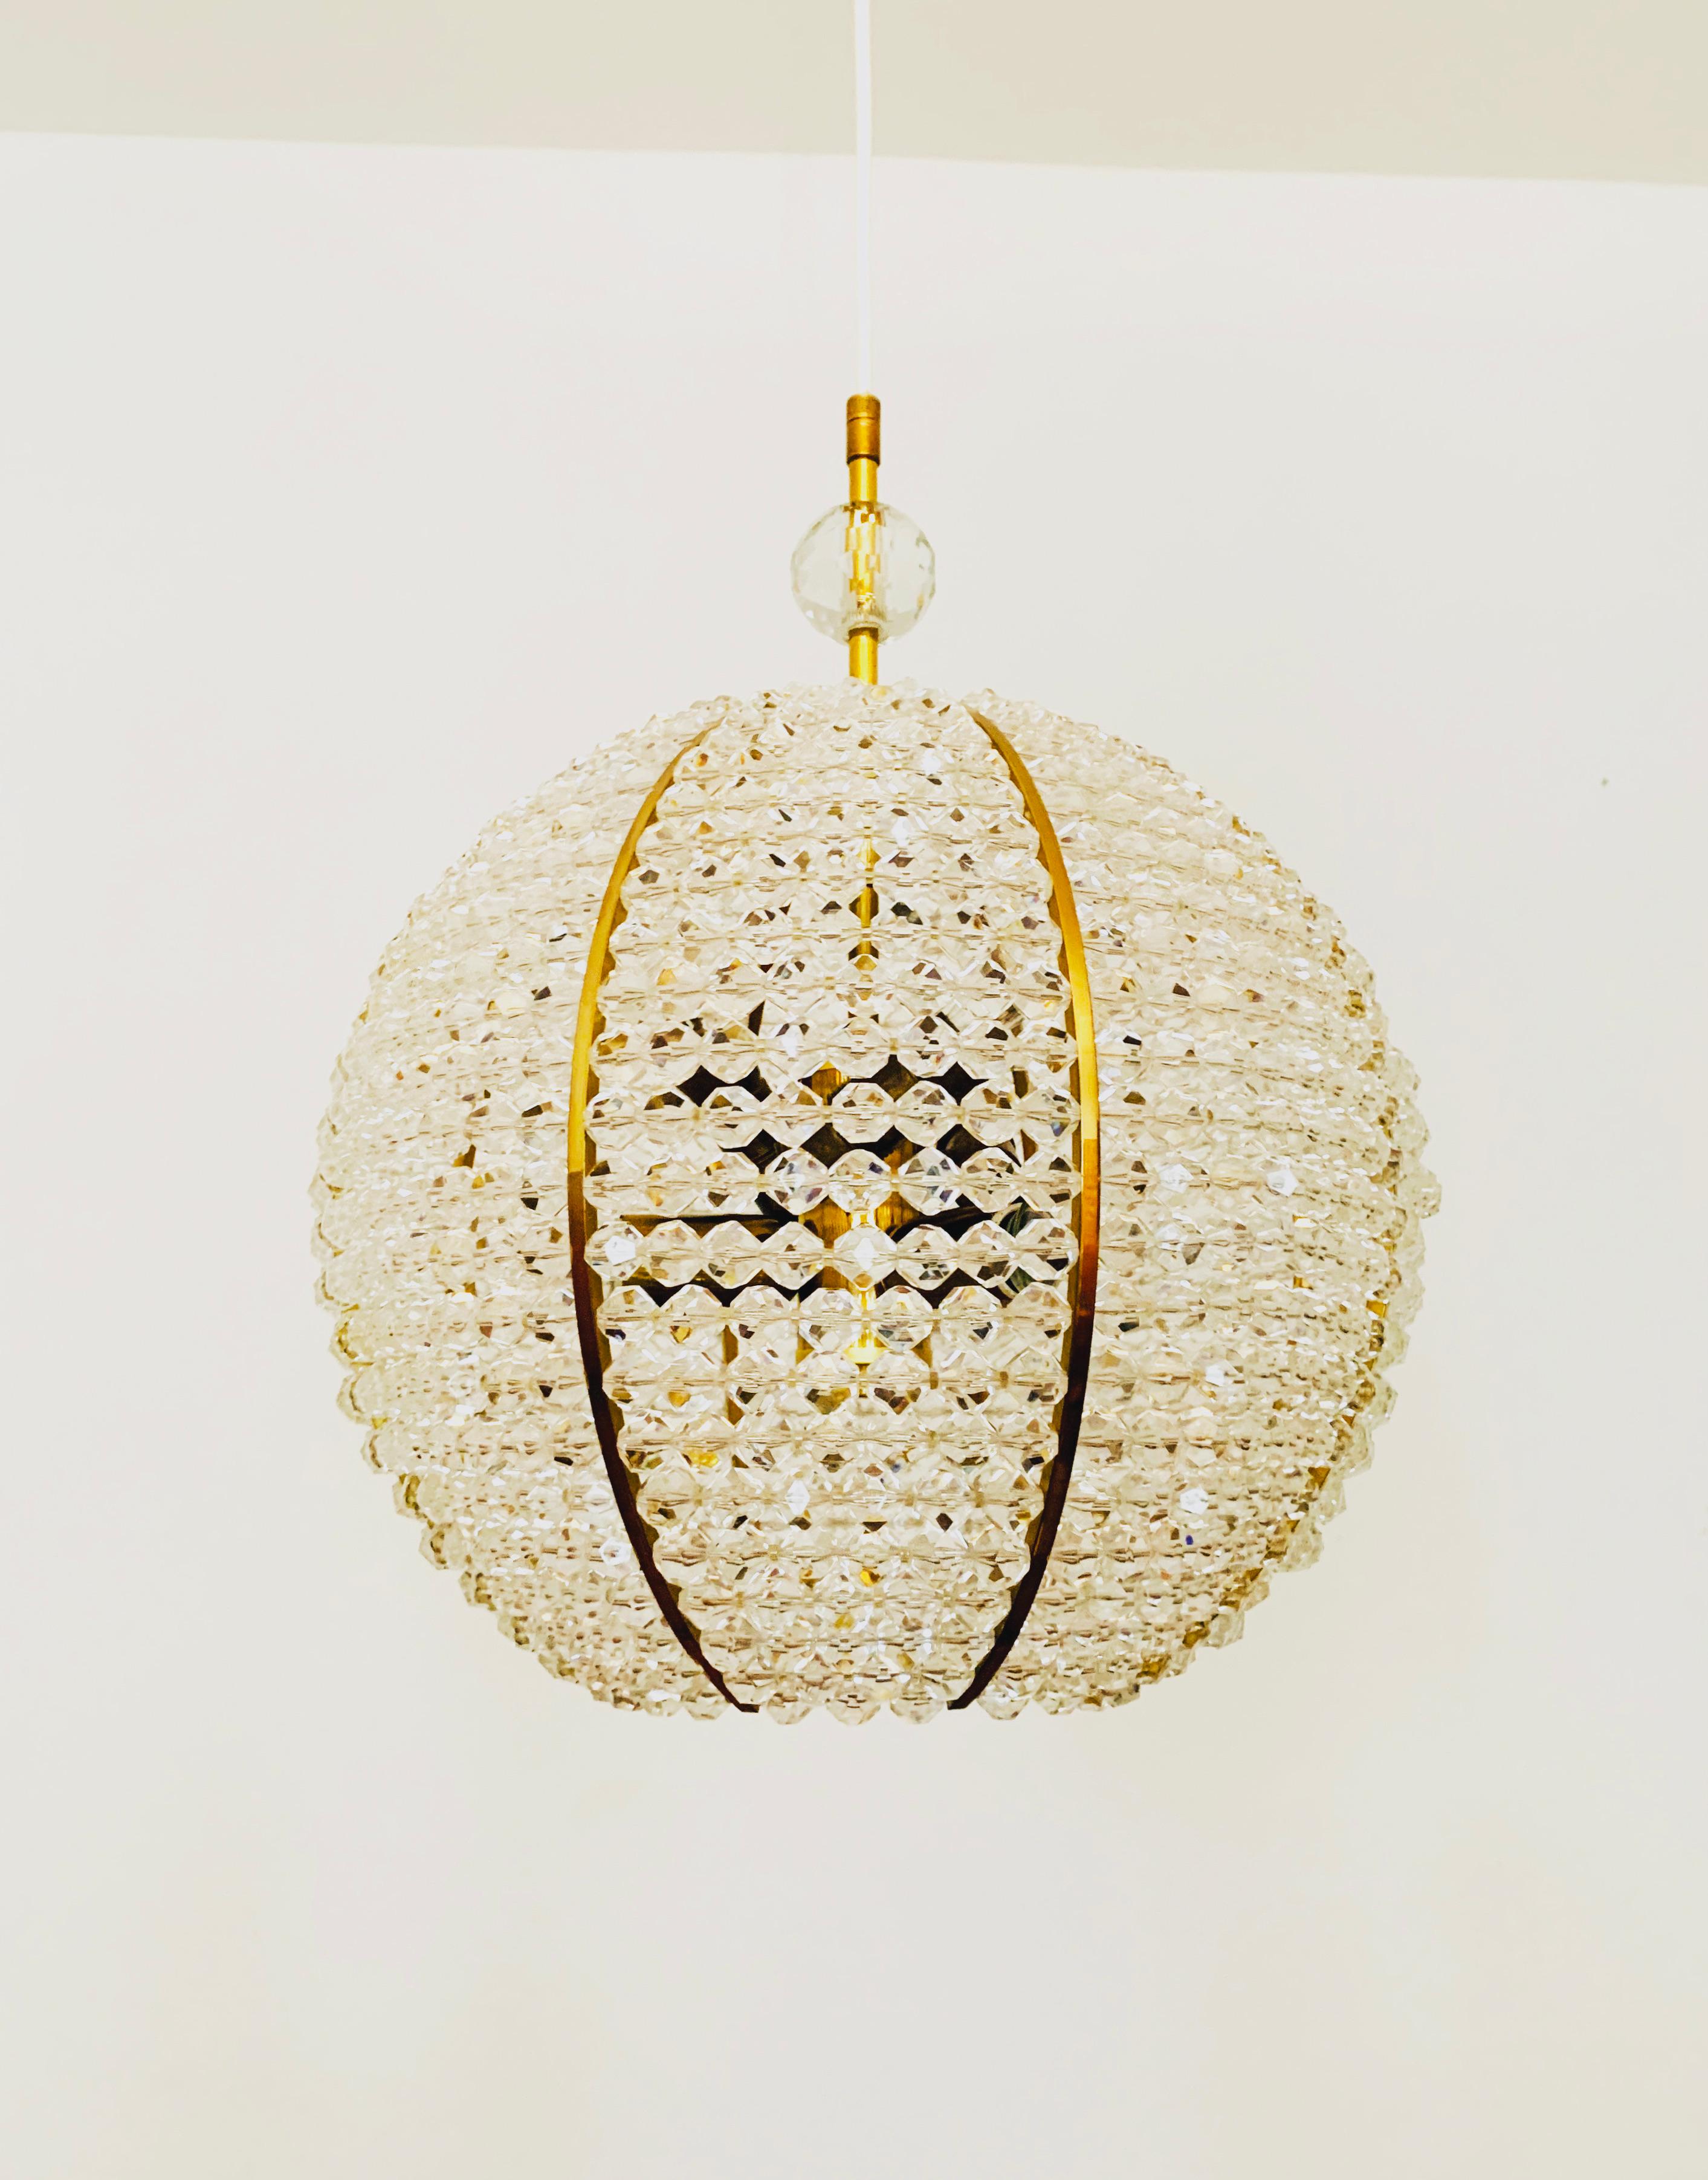 Wonderful spherical lamp from the 1960s.
The lamp with its lavishly equipped plexiglas balls and the brass details has a very luxurious look and sparkles particularly beautifully.
The design and the materials used create a great glittering